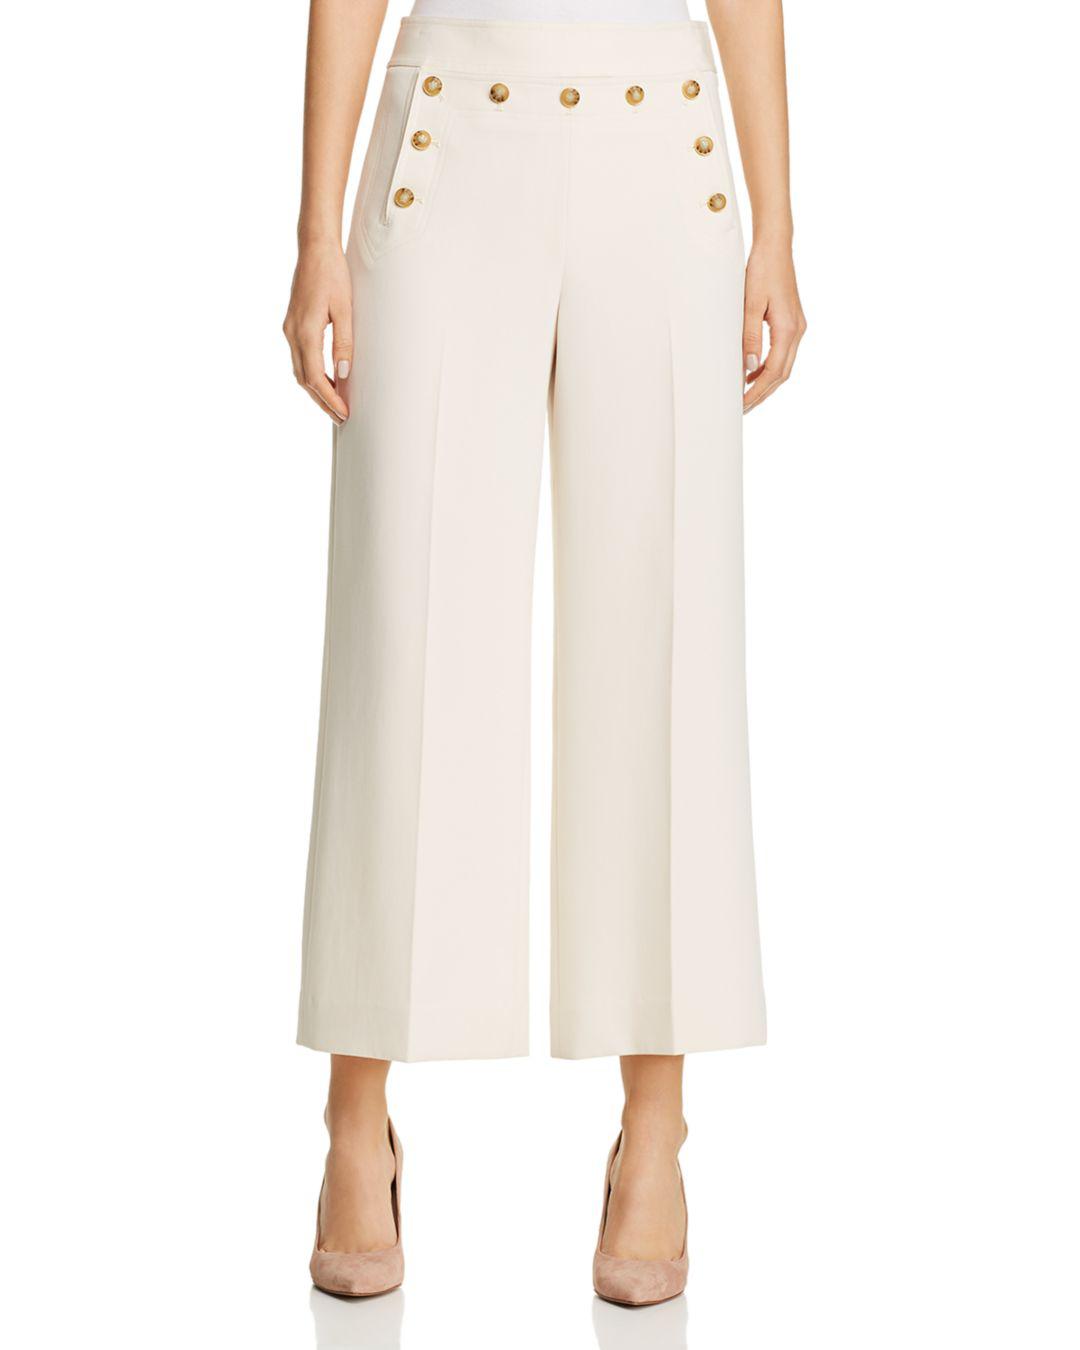 Tory Burch Cropped Sailor High-rise Pants in White (Natural) - Lyst